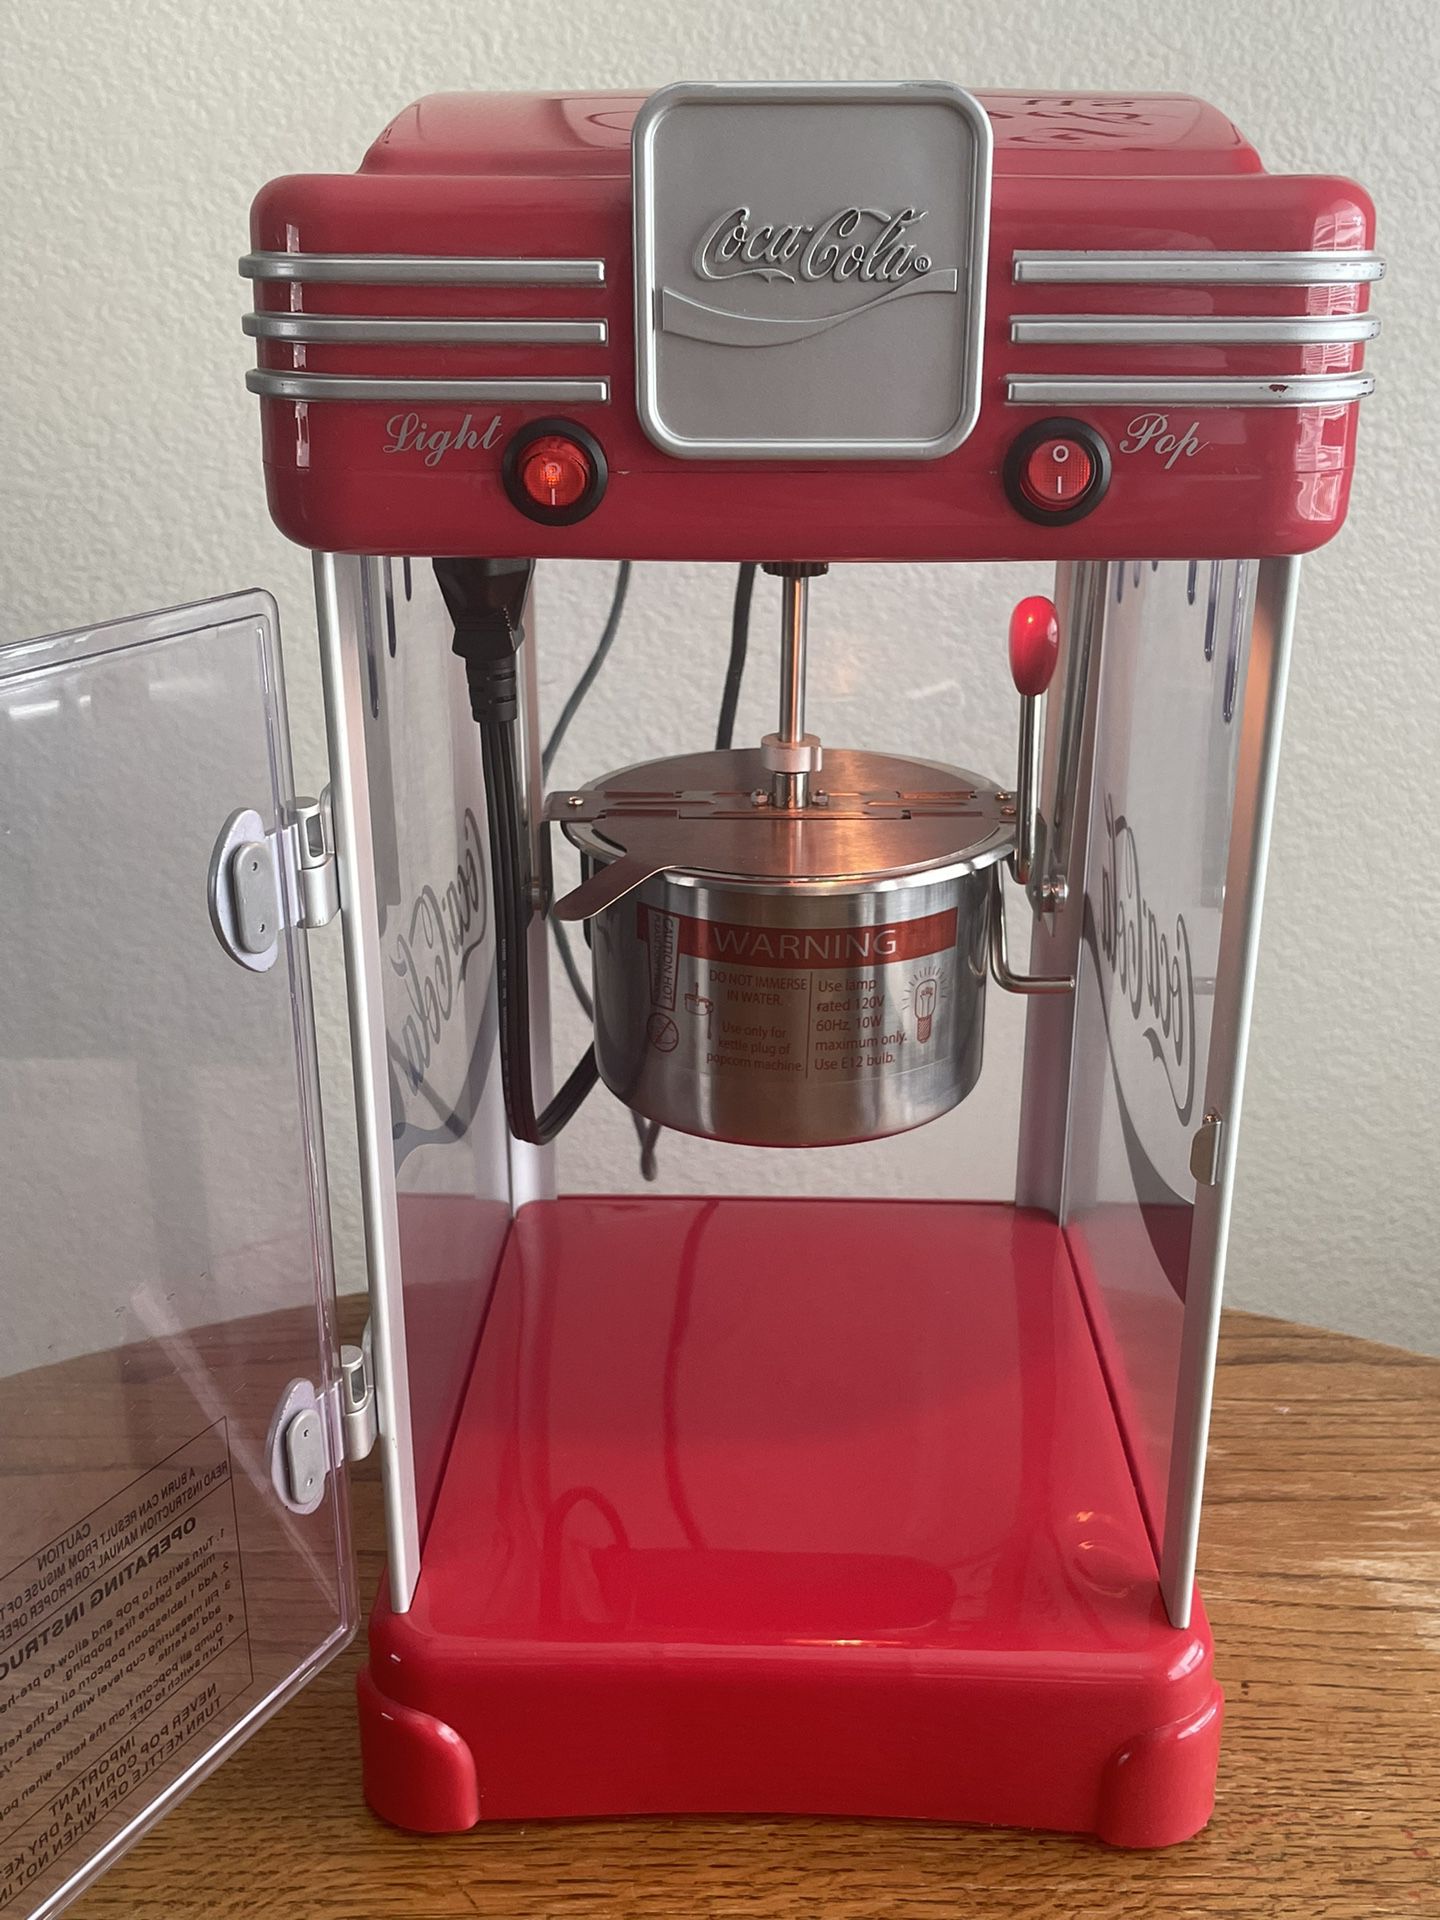 New Star Wars Popcorn maker for Sale in Pacheco, CA - OfferUp